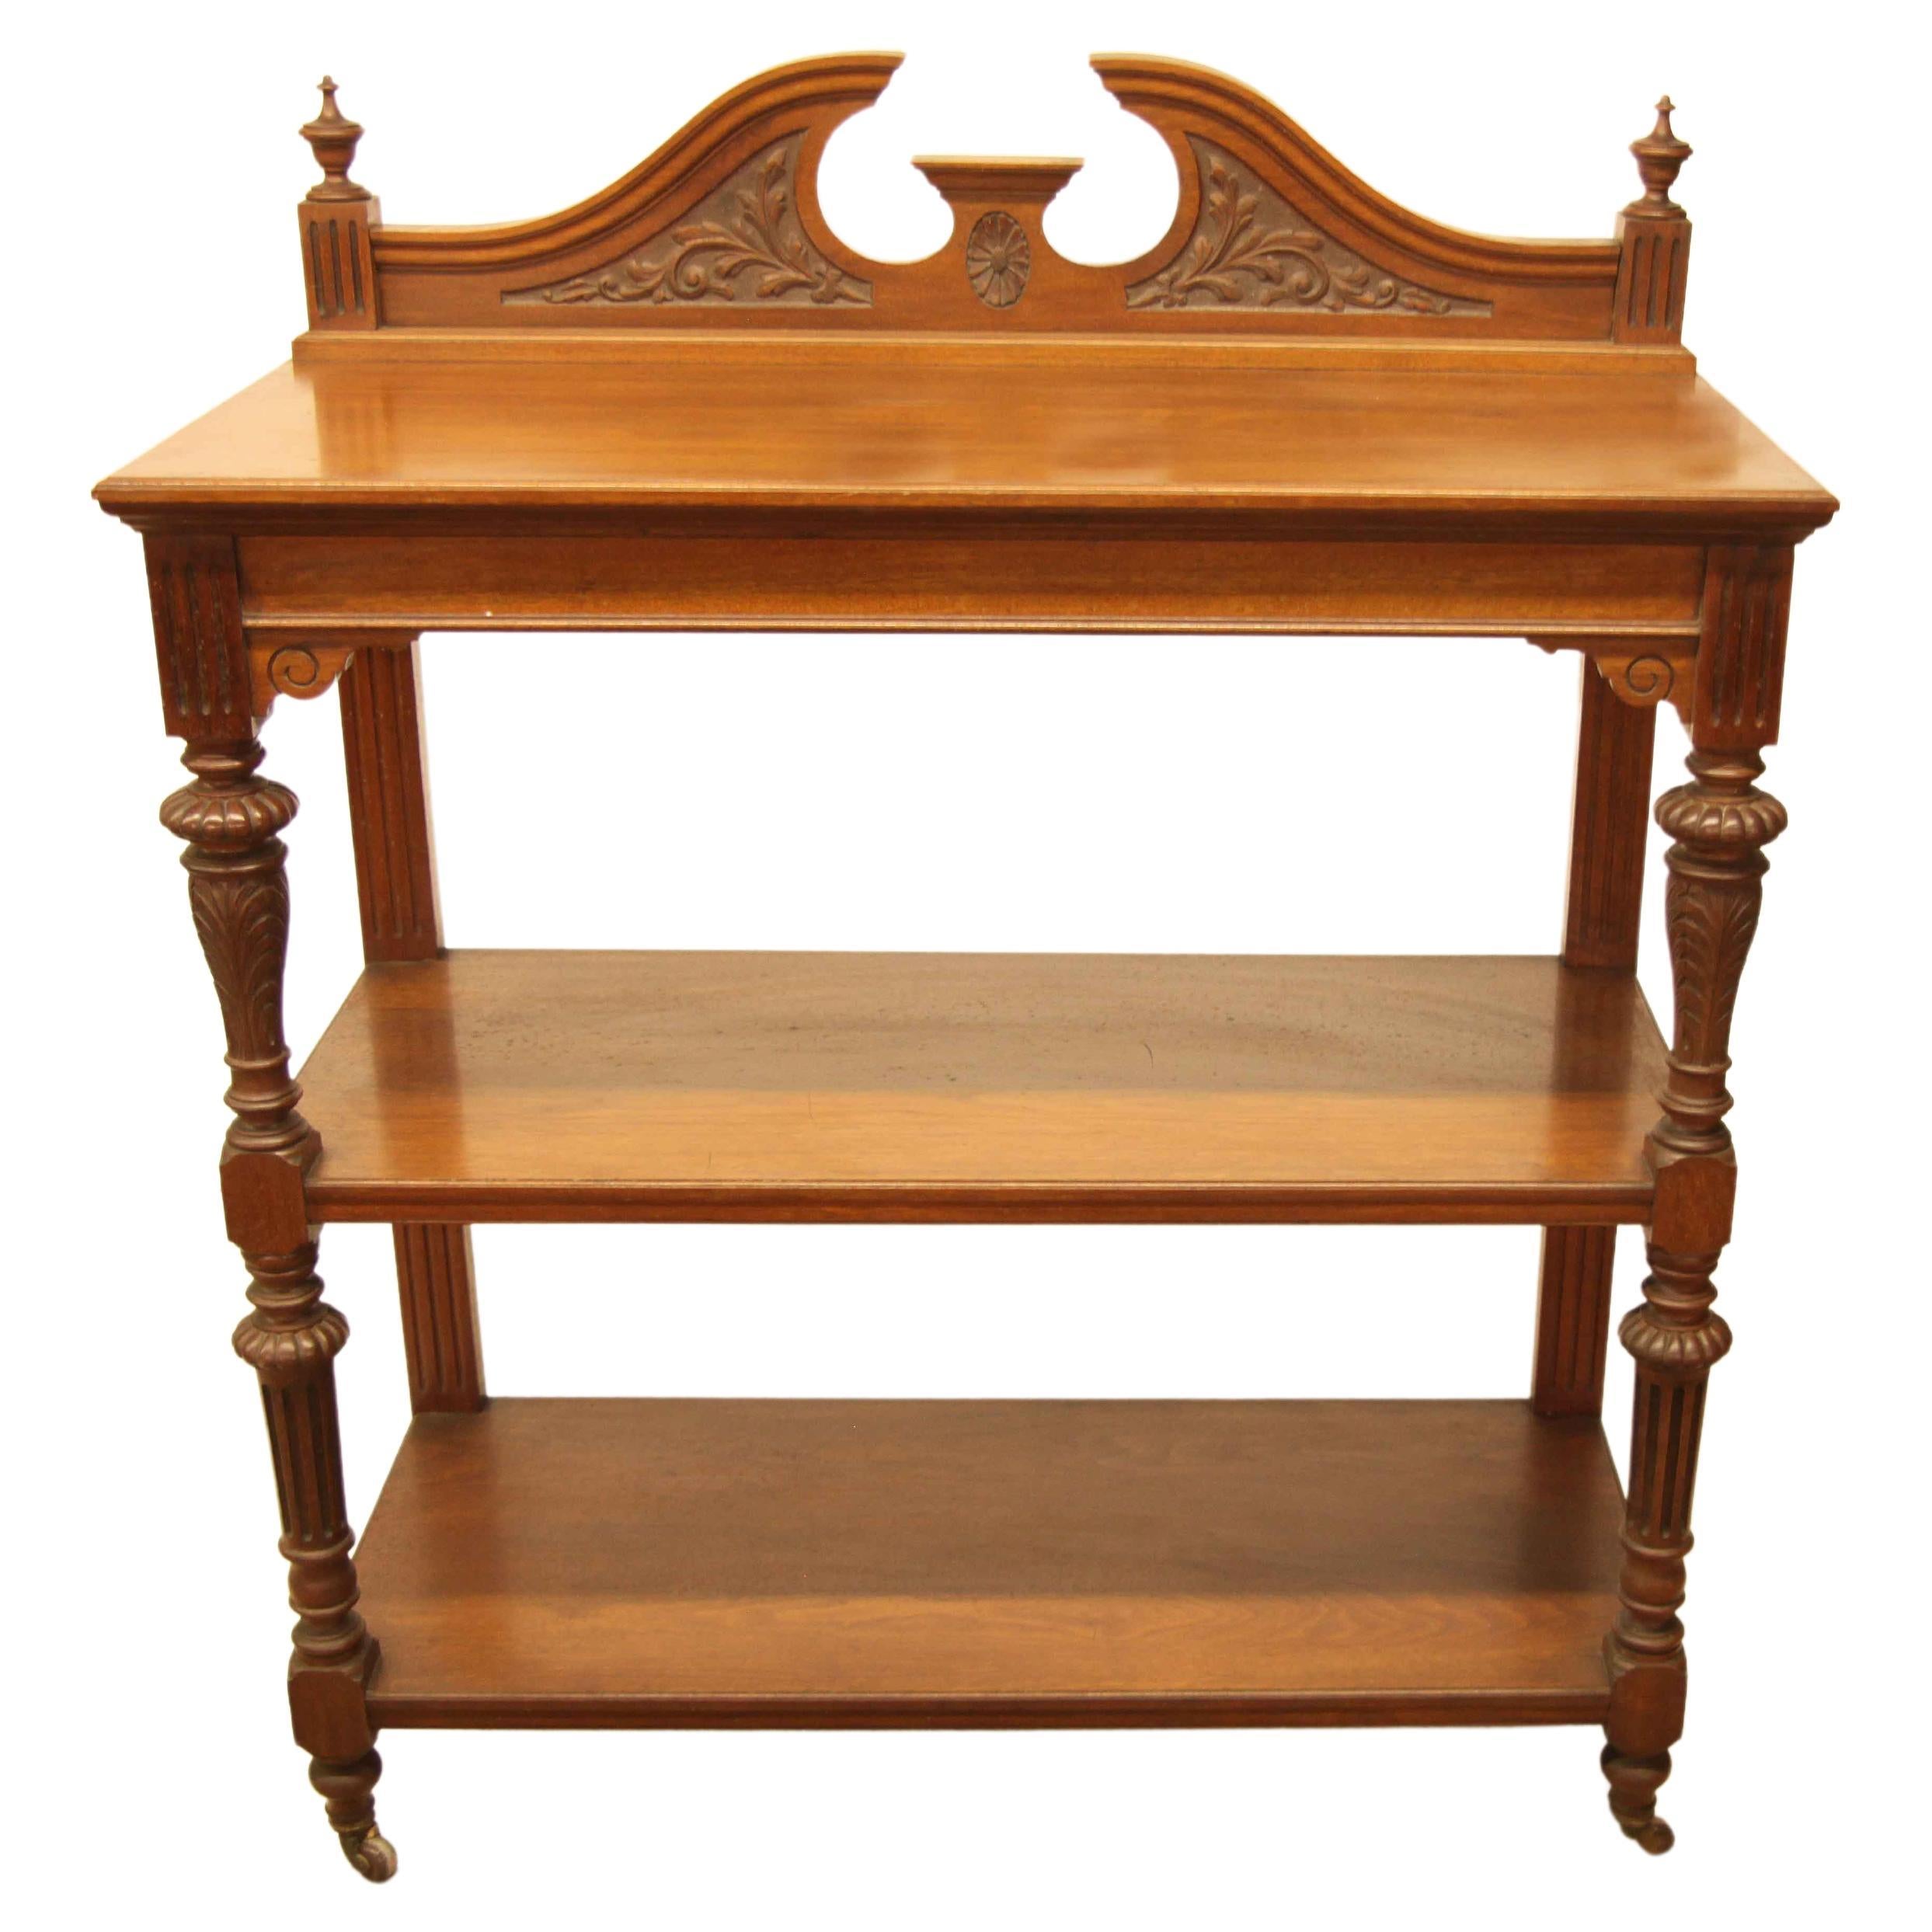 English Carved Walnut Three Tier Server For Sale